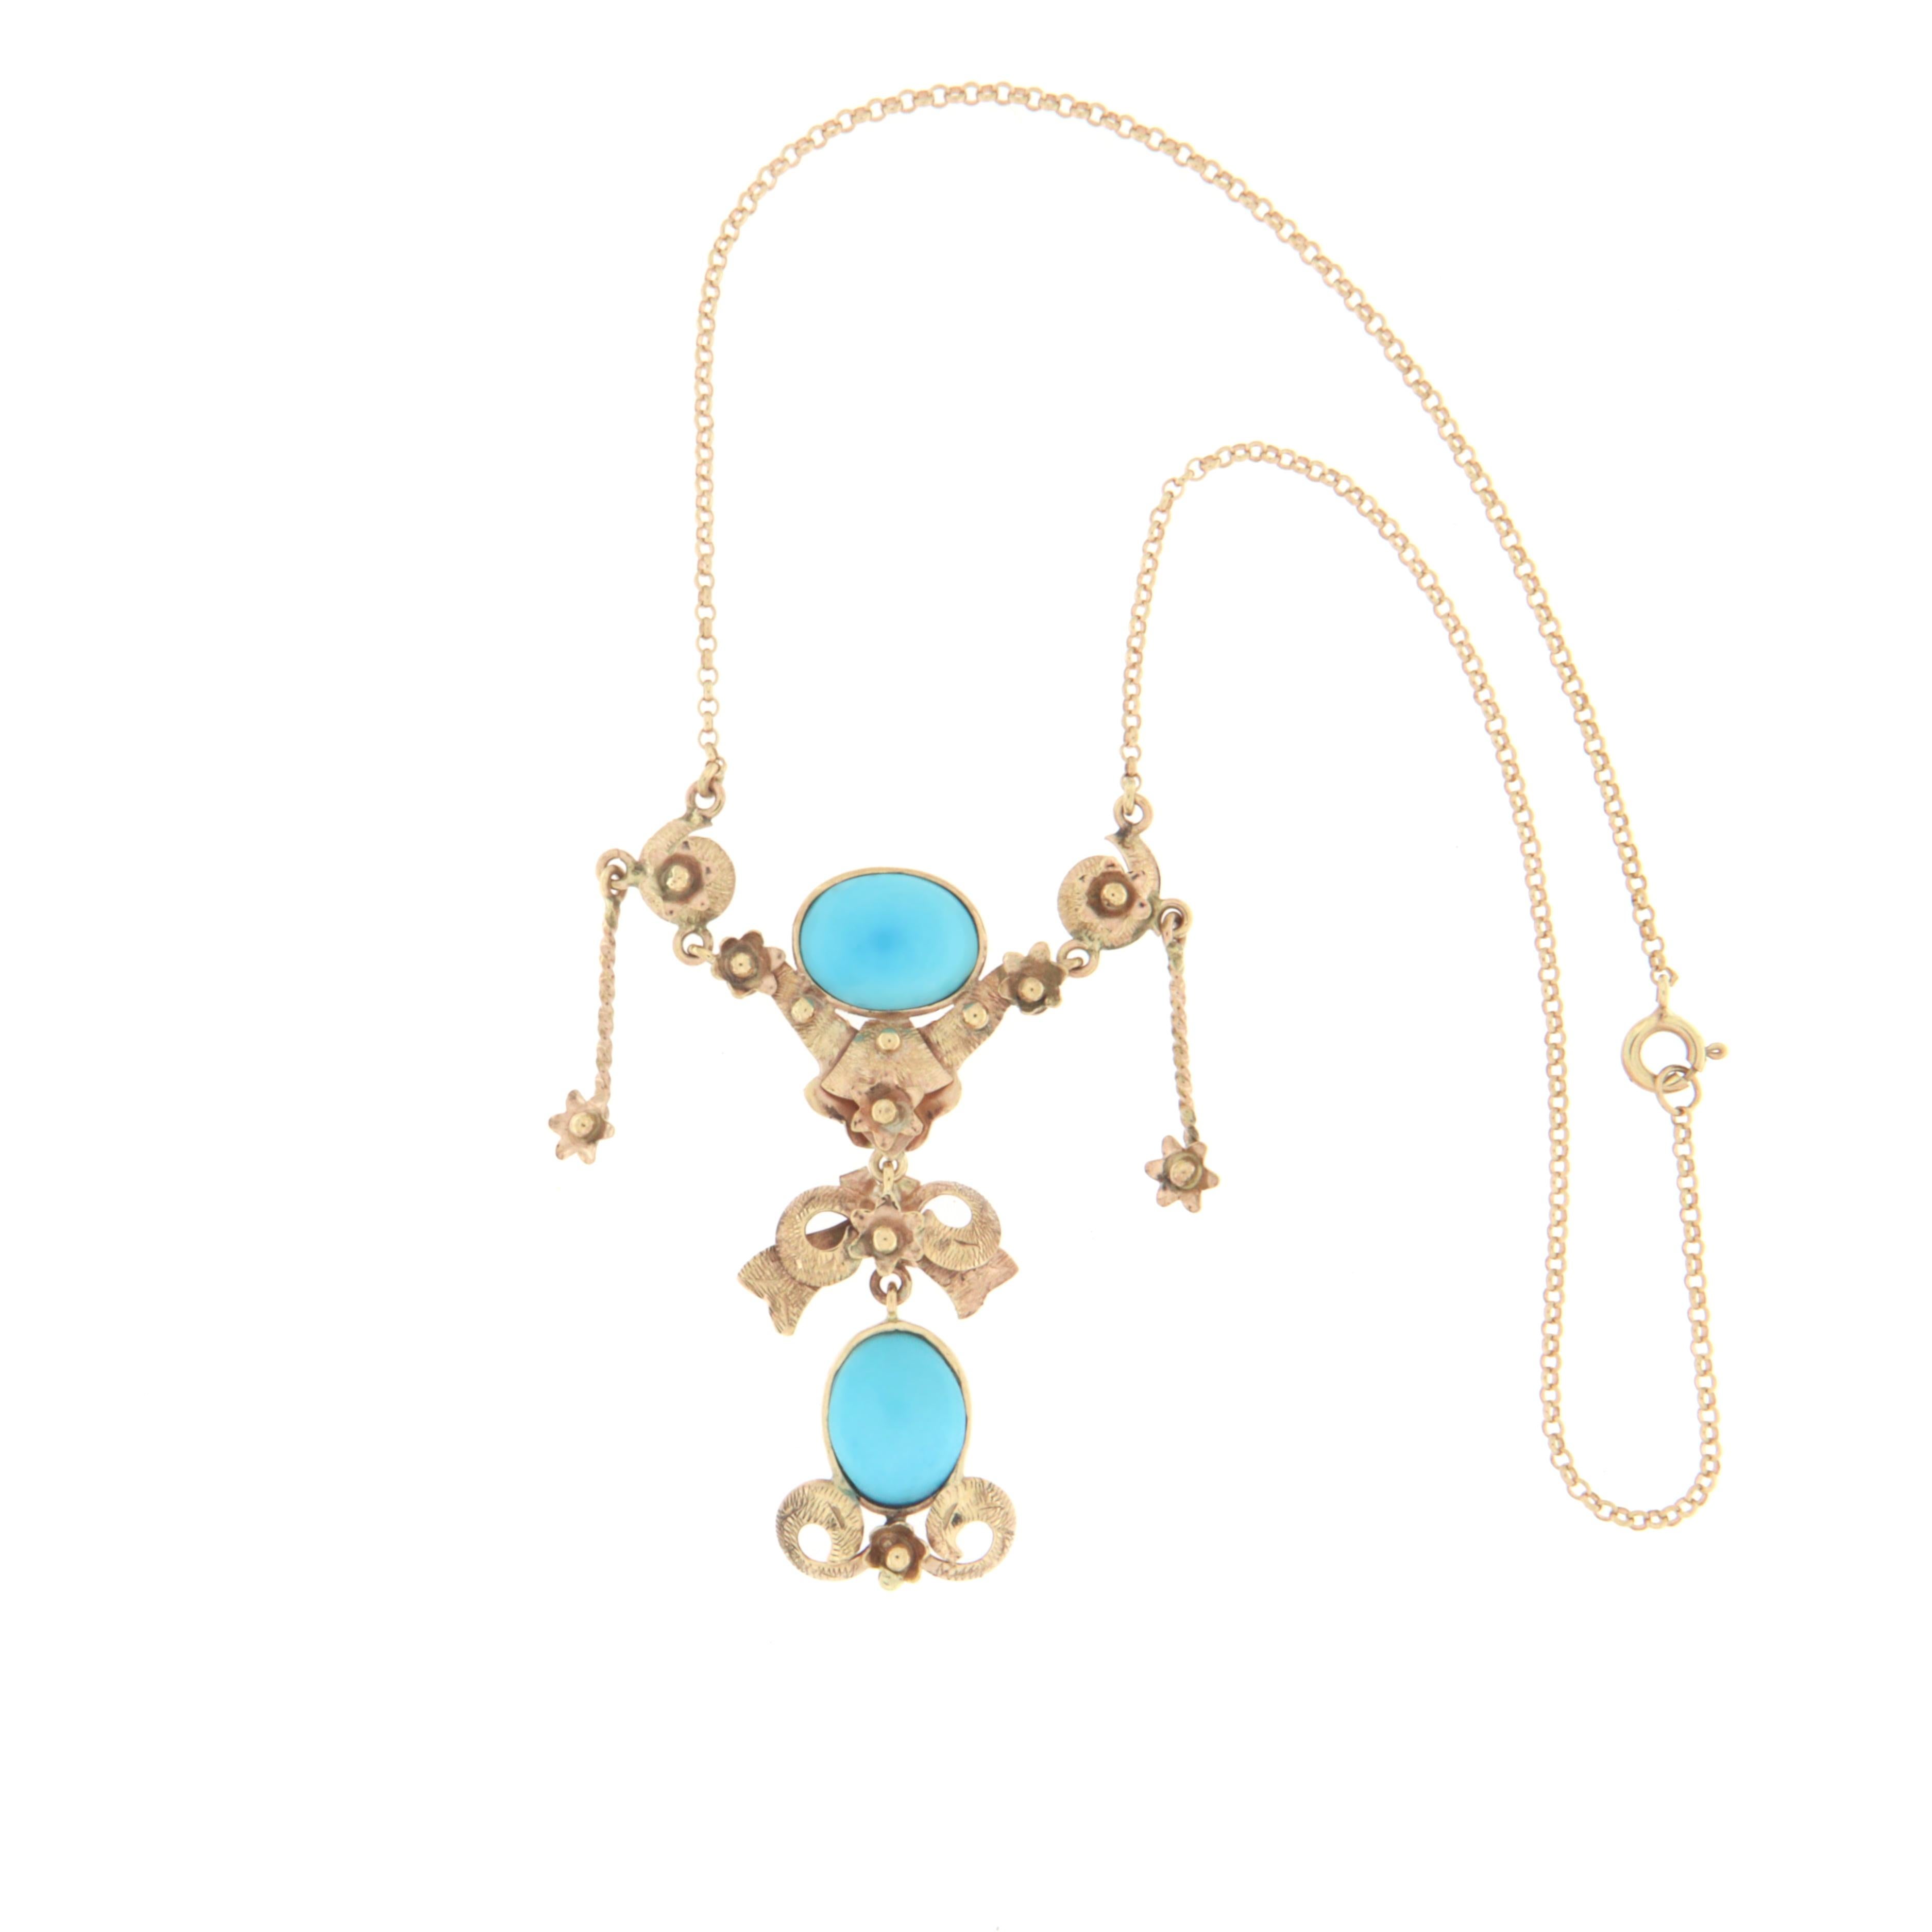 Particular necklace made by expert craftsmen that recalls the flavor of the past era in 9 carat yellow gold and natural turquoise of Arizona origin.

The total weight of the necklace is 12.10 grams

The weight of the turquoise is equivalent to 1.90